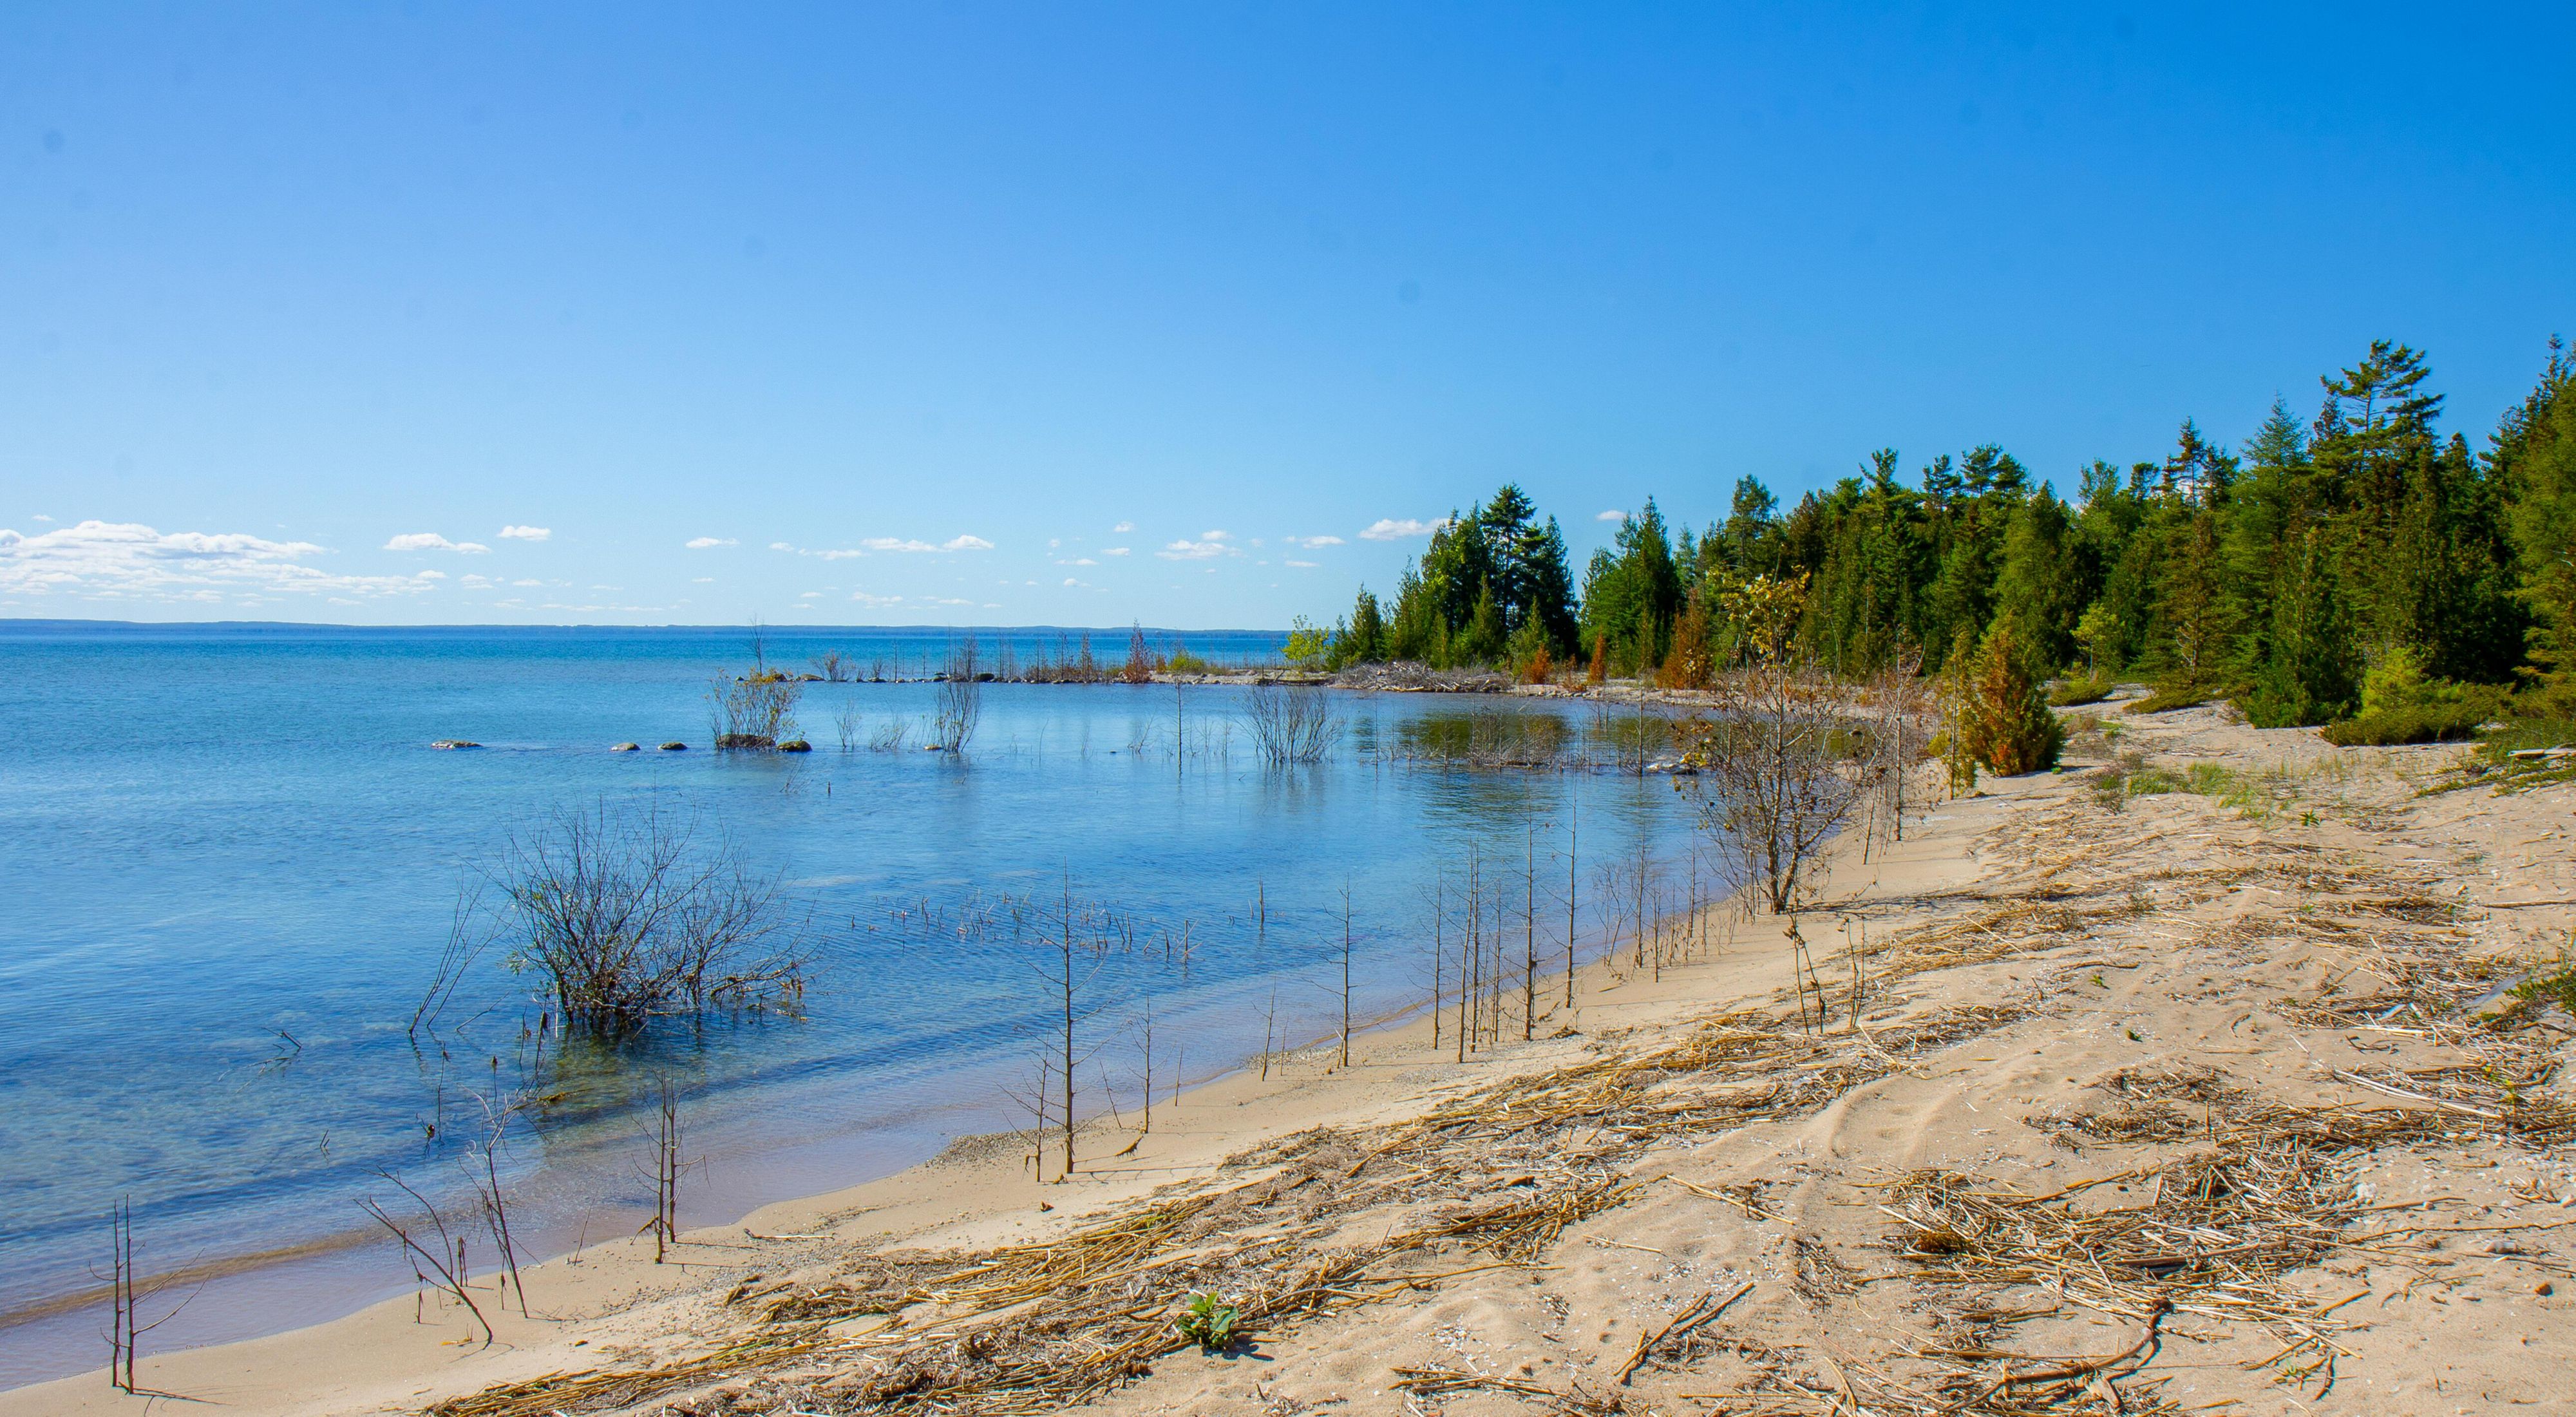 Looking out onto the clear blue water of Lake Huron from the coast of the North Point Peninsula.